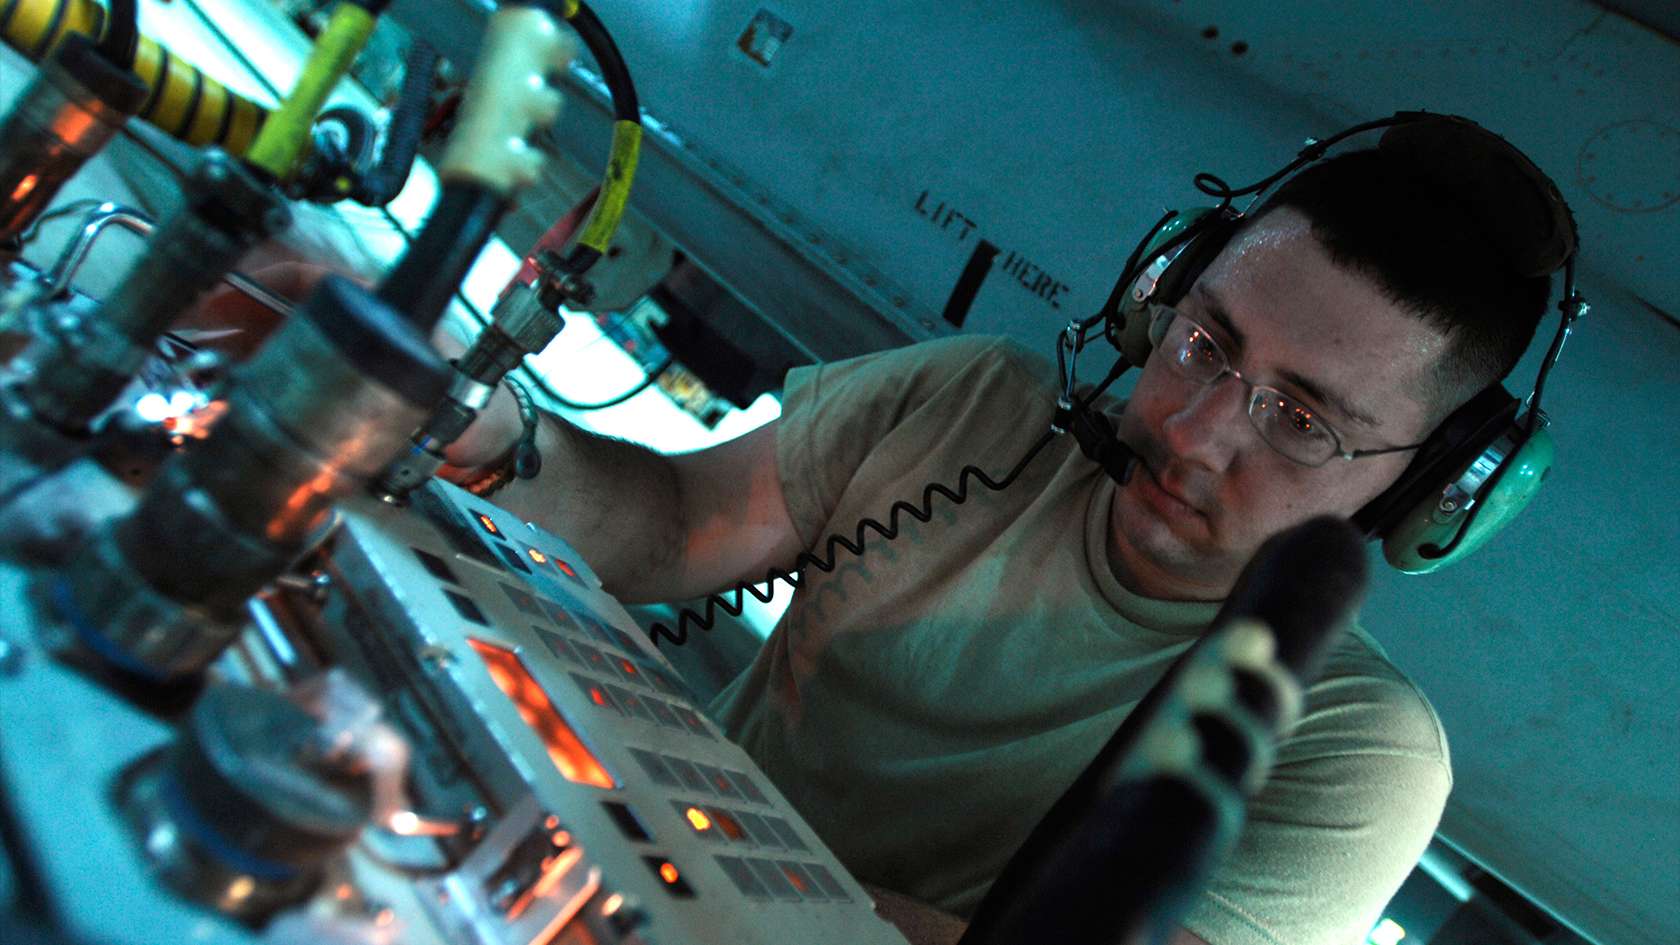 airman wearing headset and looking at control board